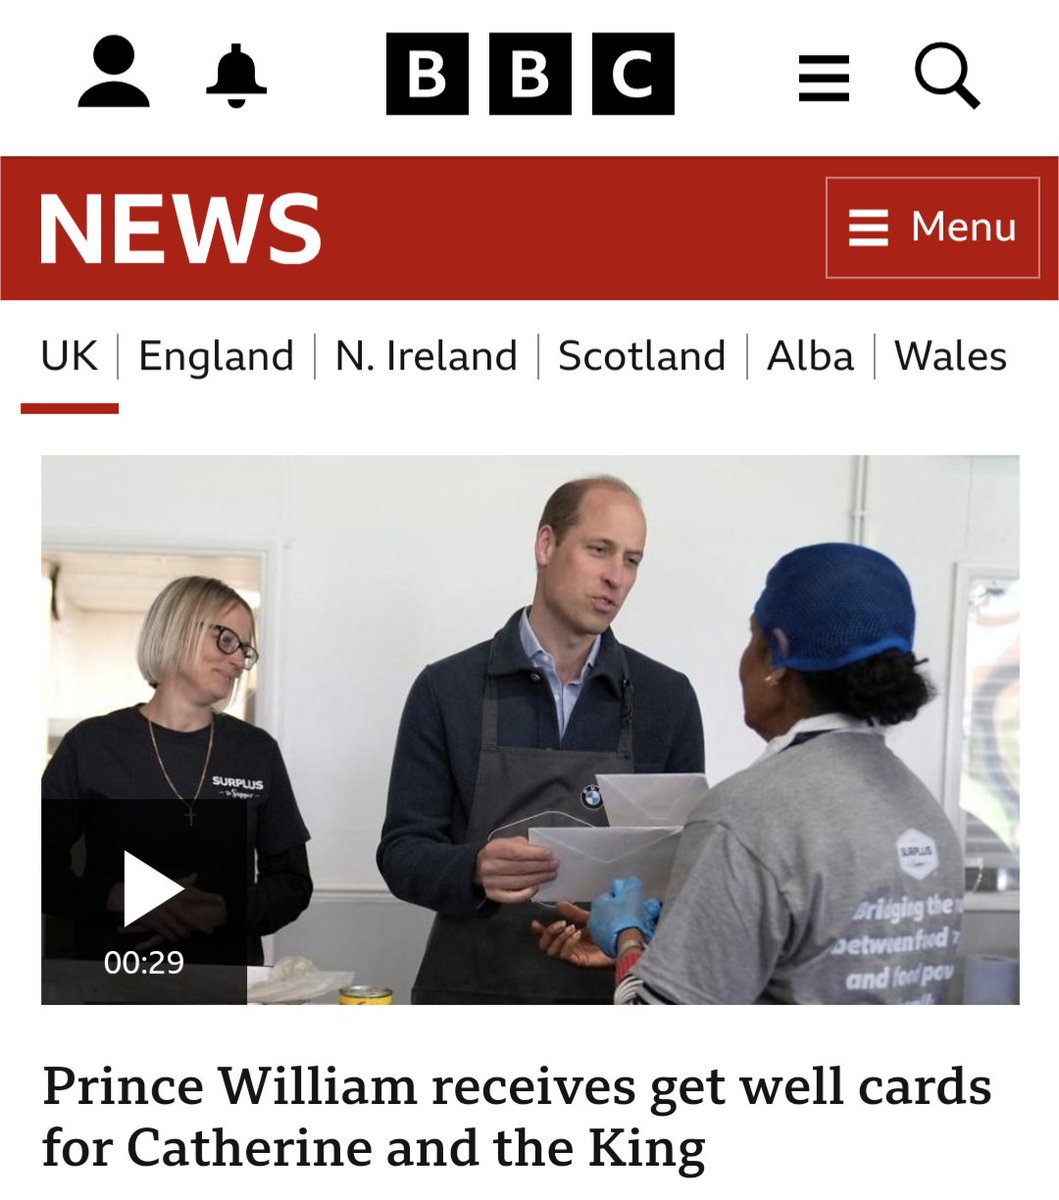 'Man gets 2 cards to deliver' is news. That's a very expensive postman.